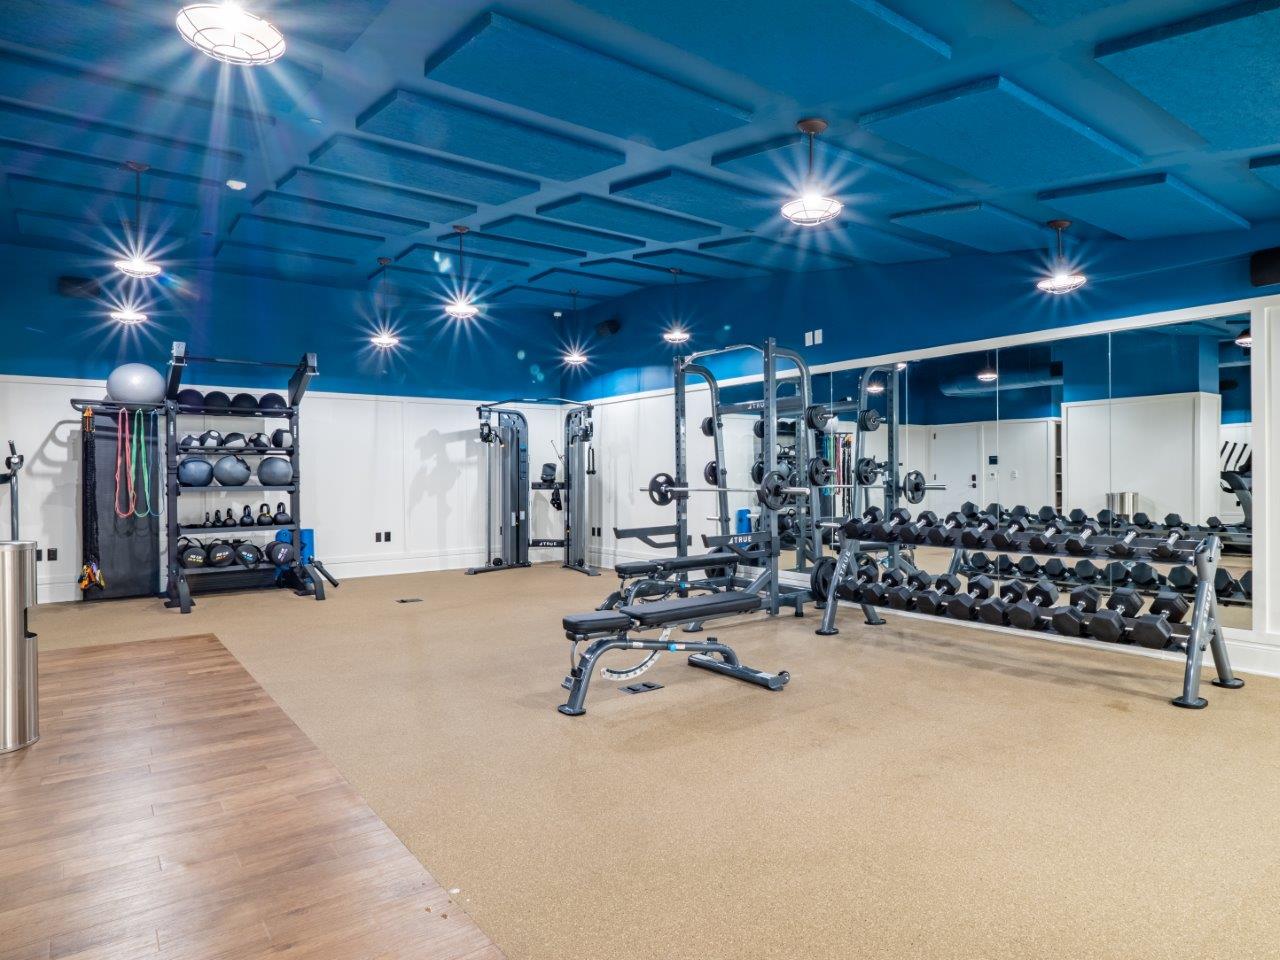 Capitol Rose Luxury Apartments in Washington, DC Fitness Center